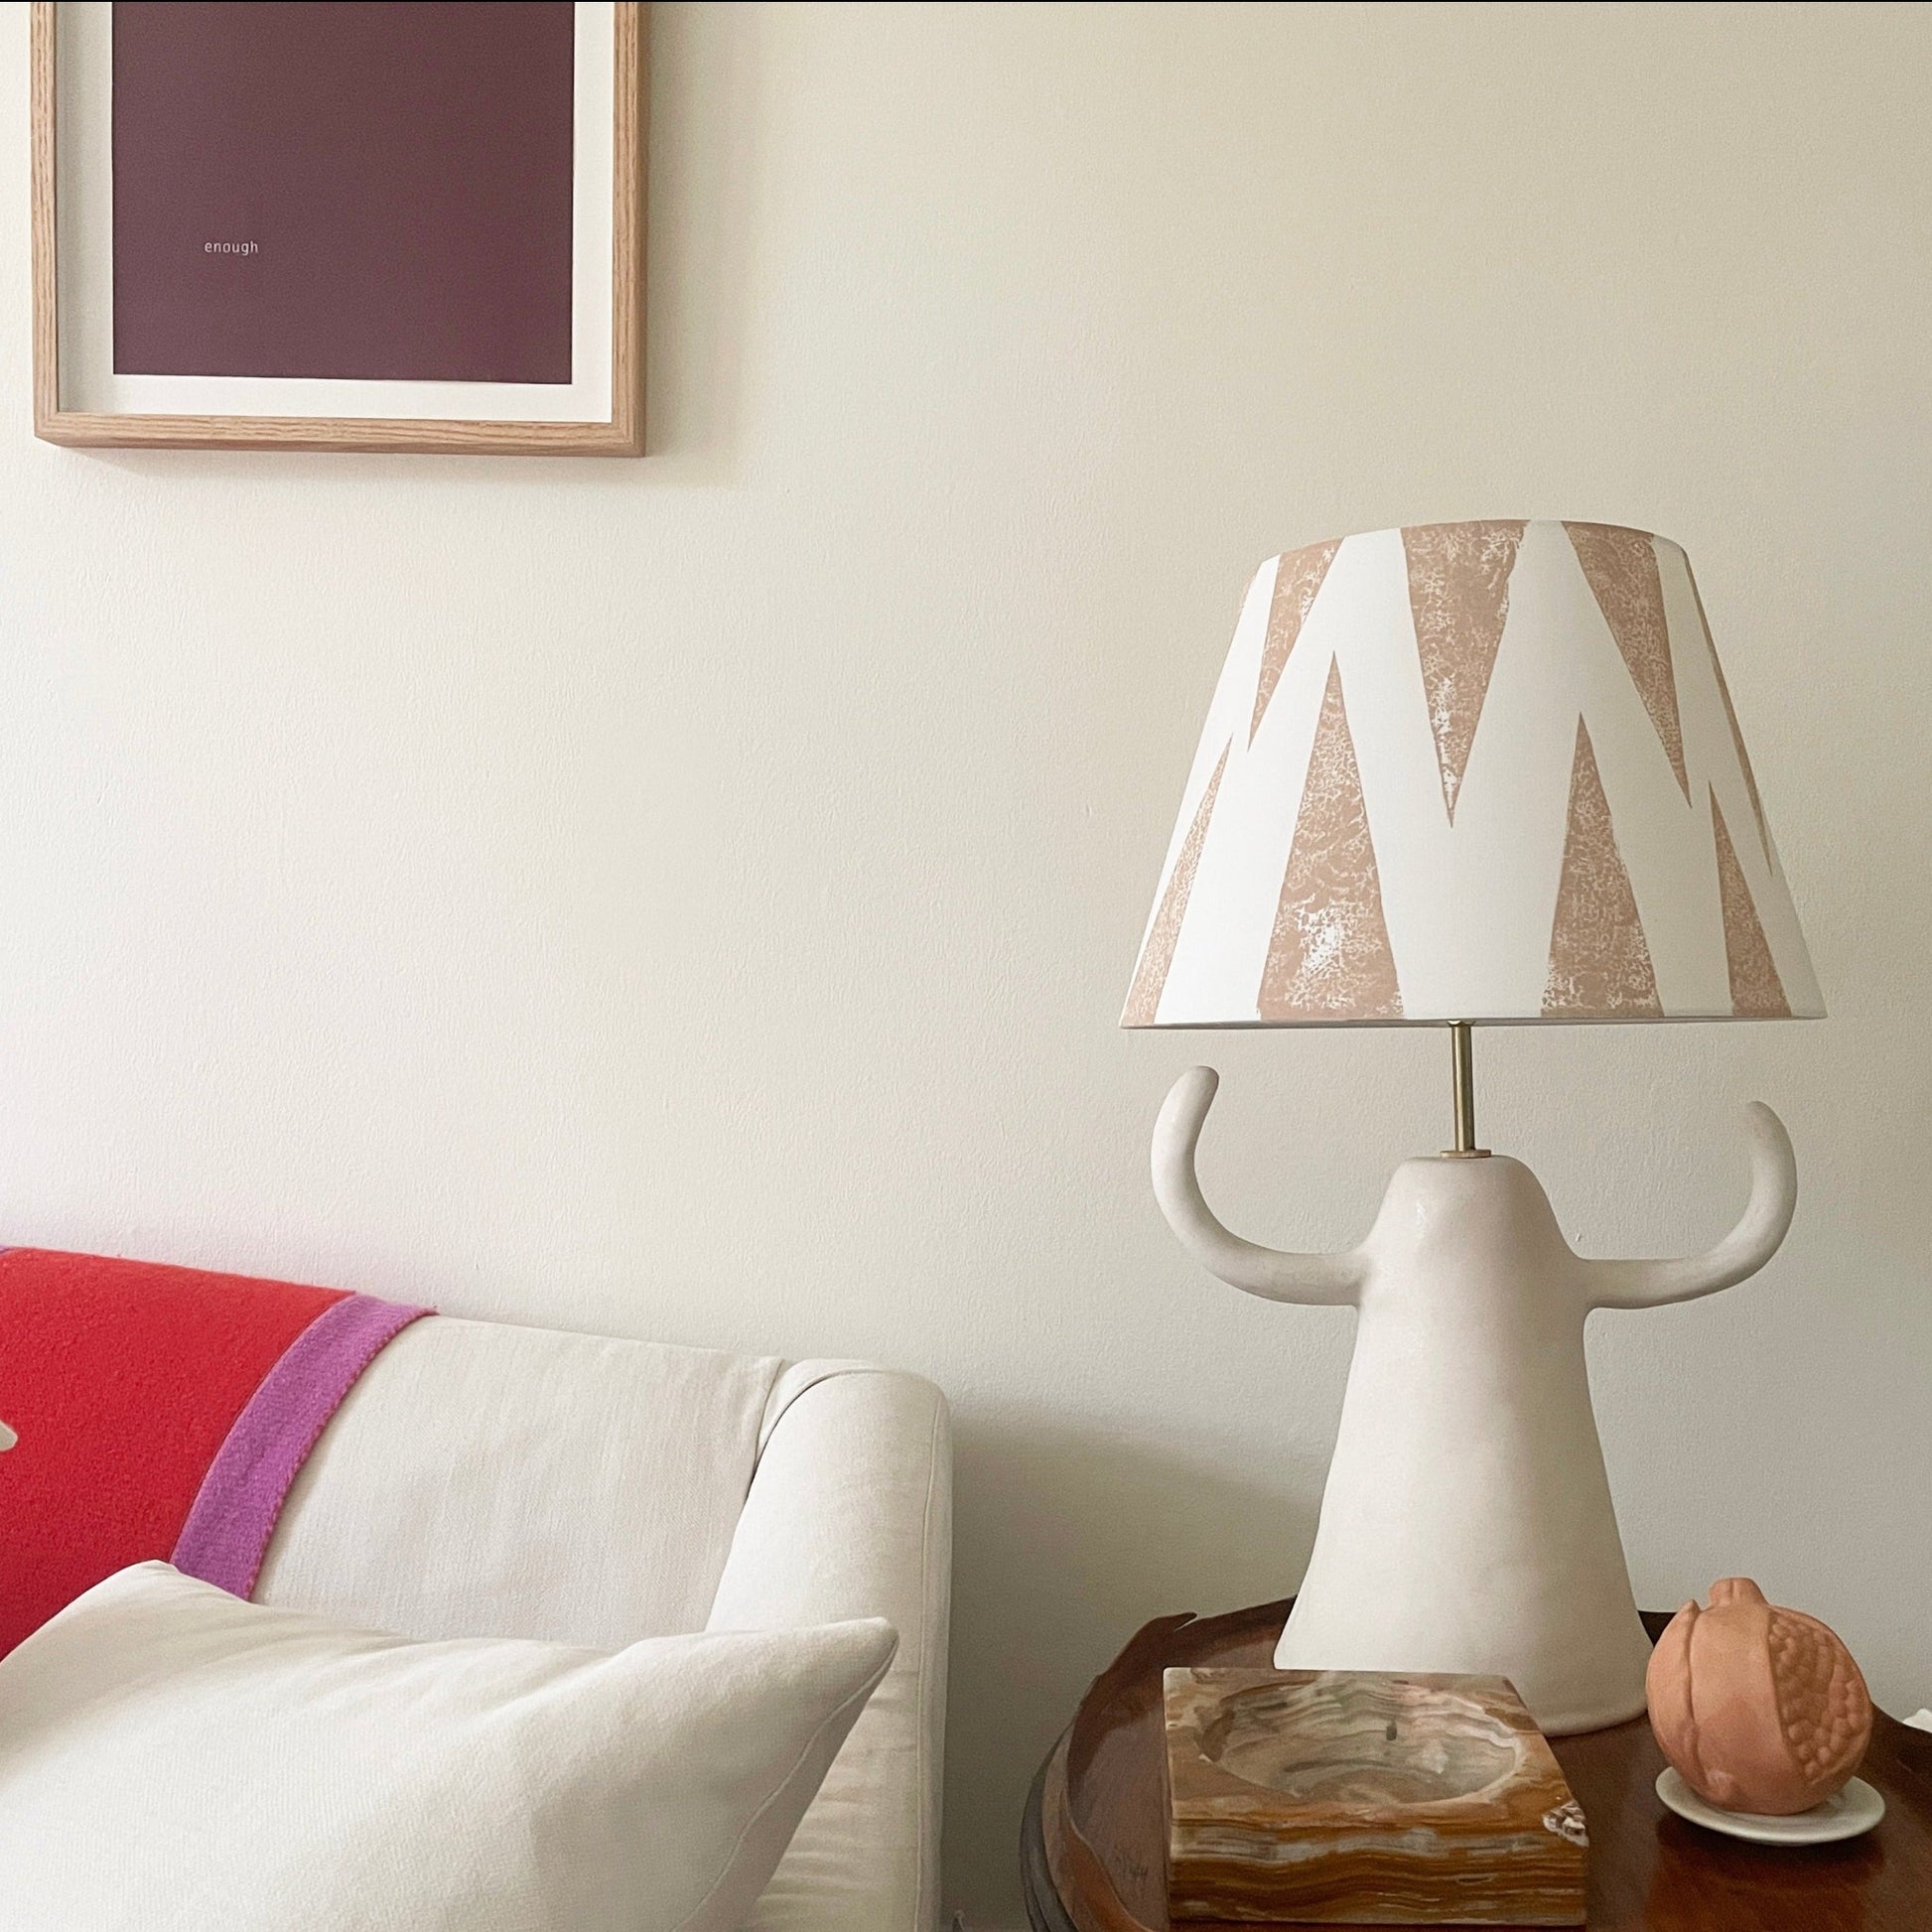 Light pink lampshade on side table next to sofa